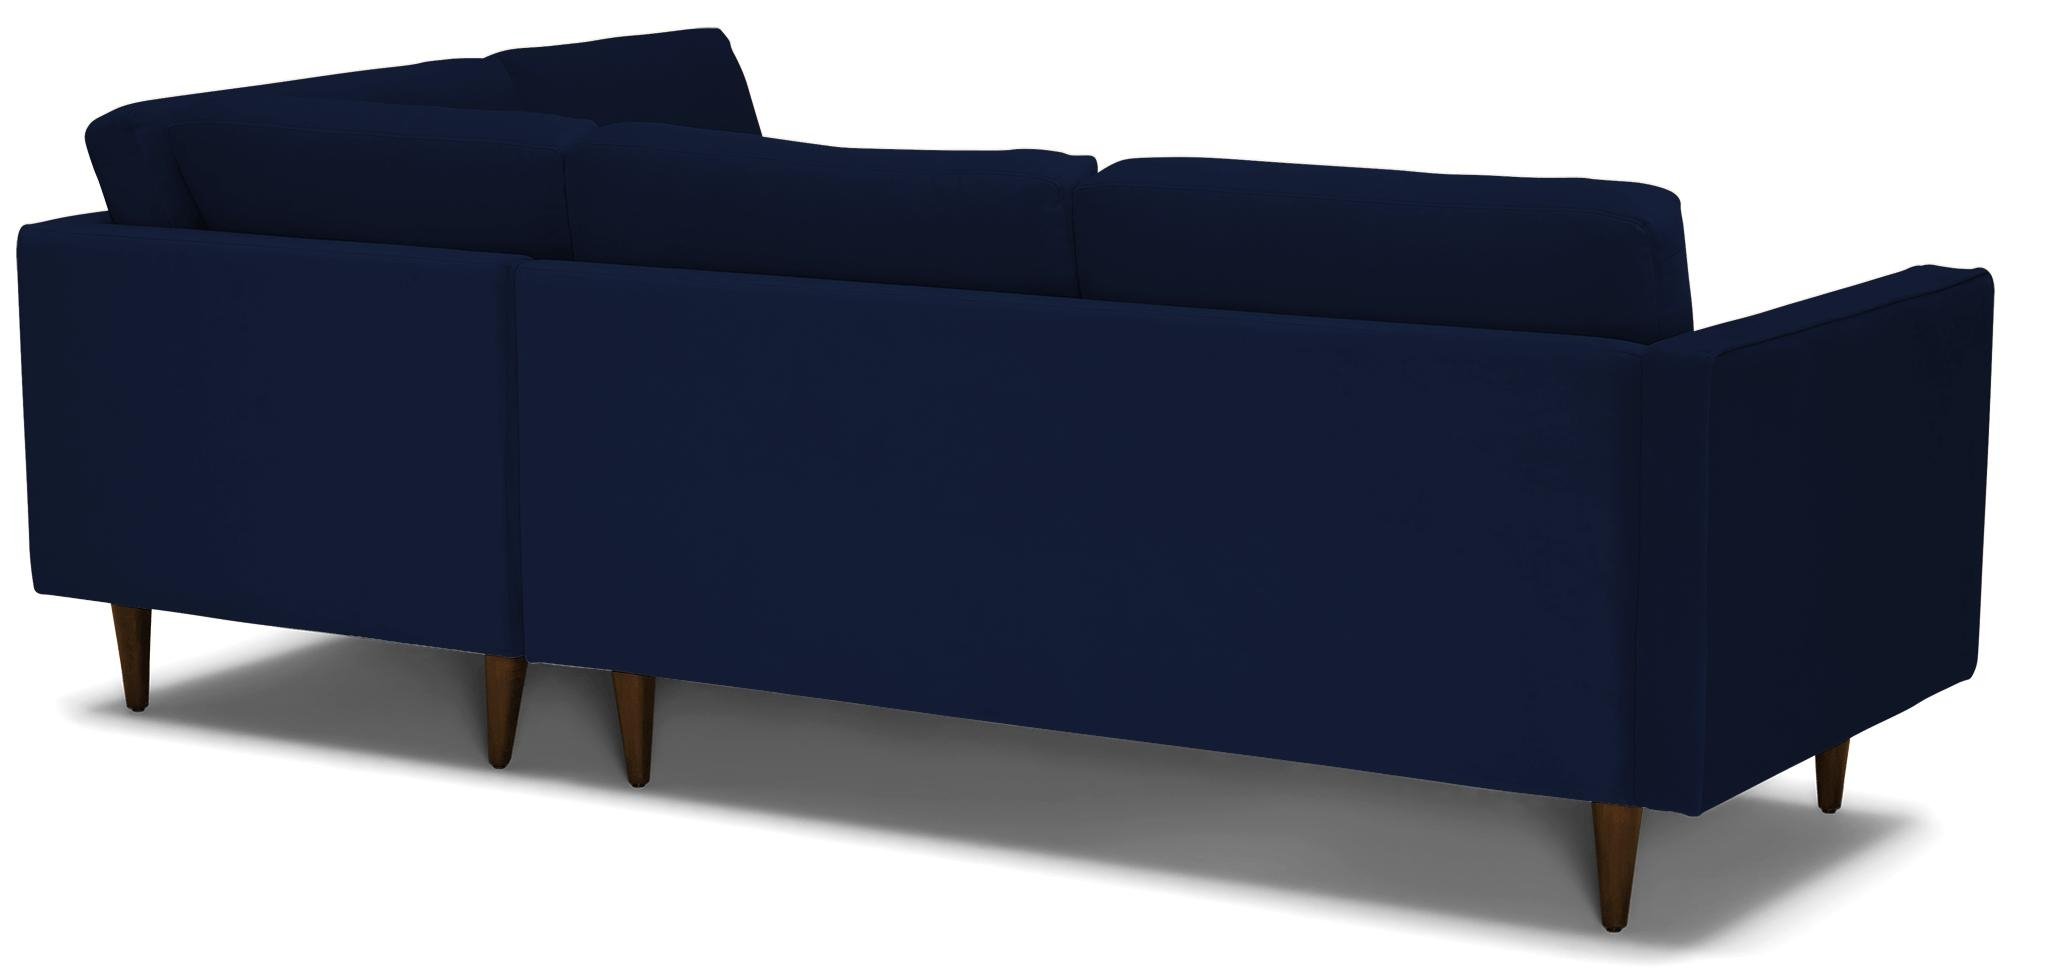 Blue Briar Mid Century Modern Sectional with Bumper - Royale Cobalt - Mocha - Right  - Image 3